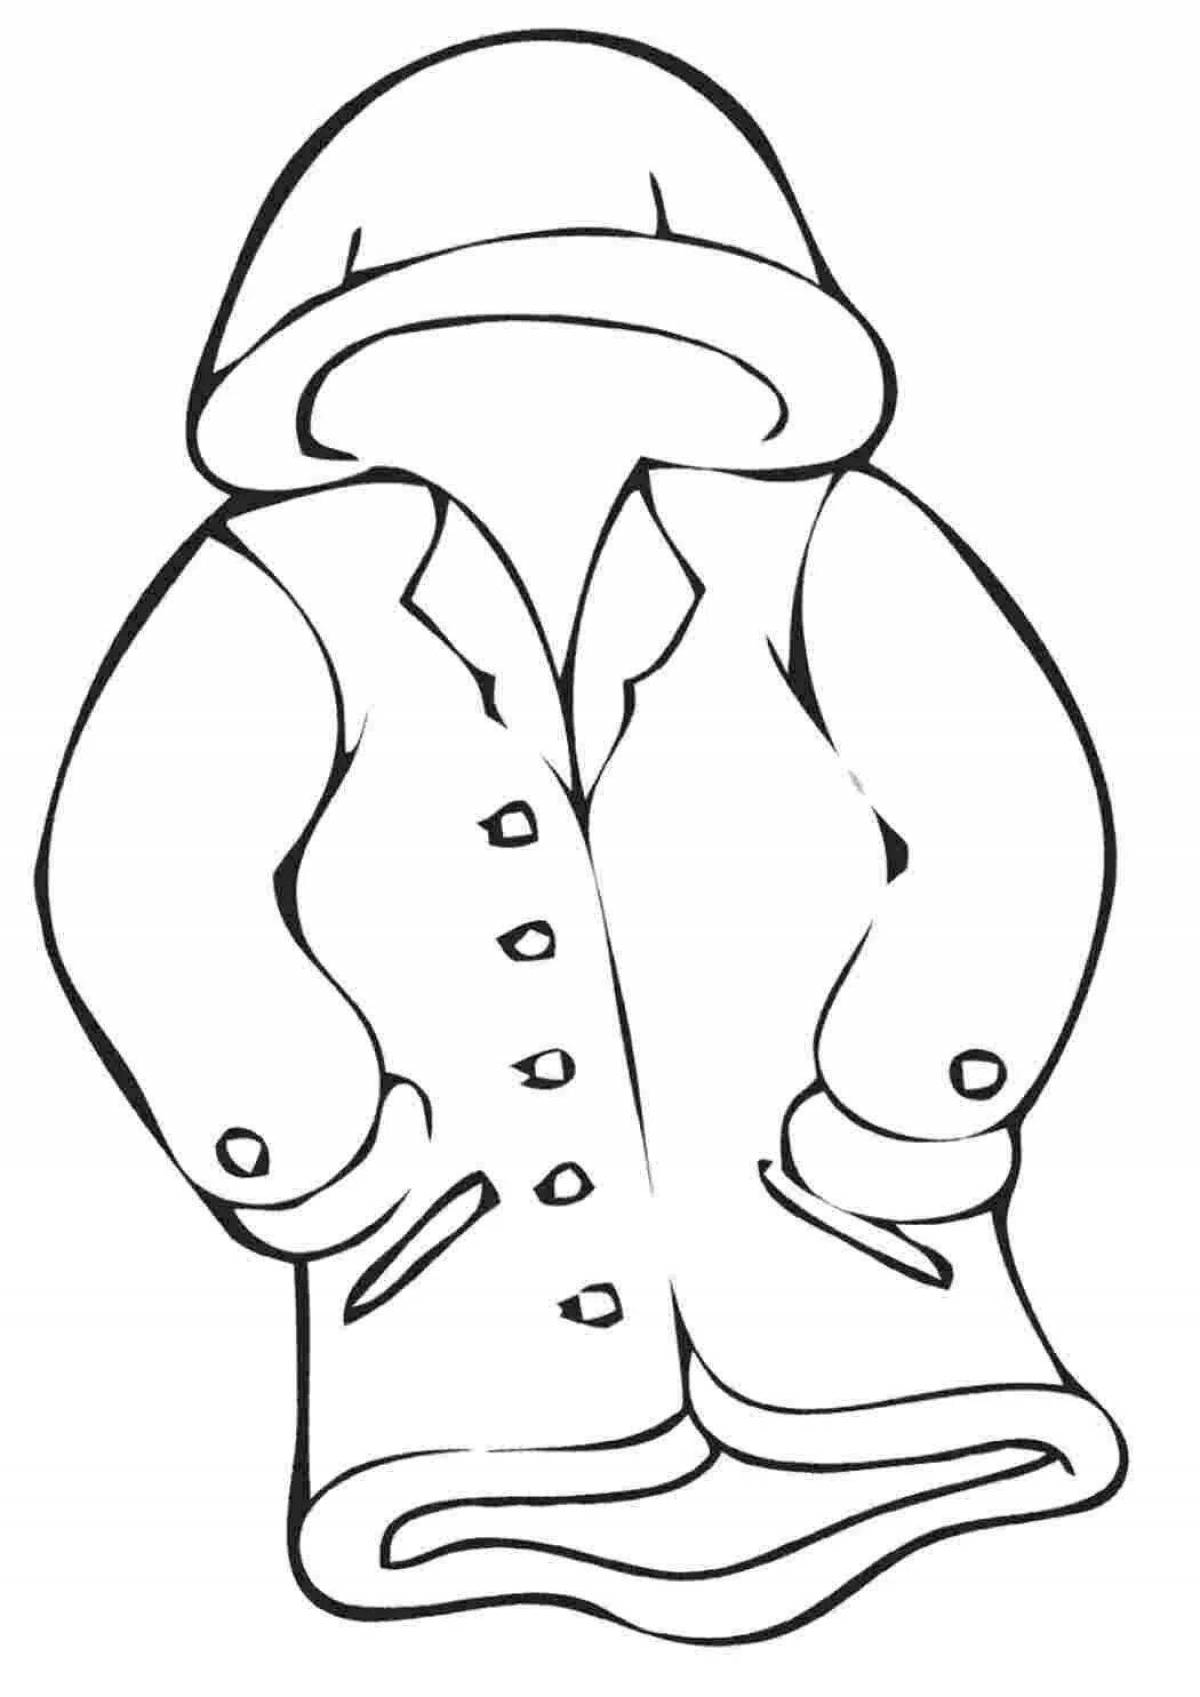 Amazing jacket coloring page for 3-4 year olds